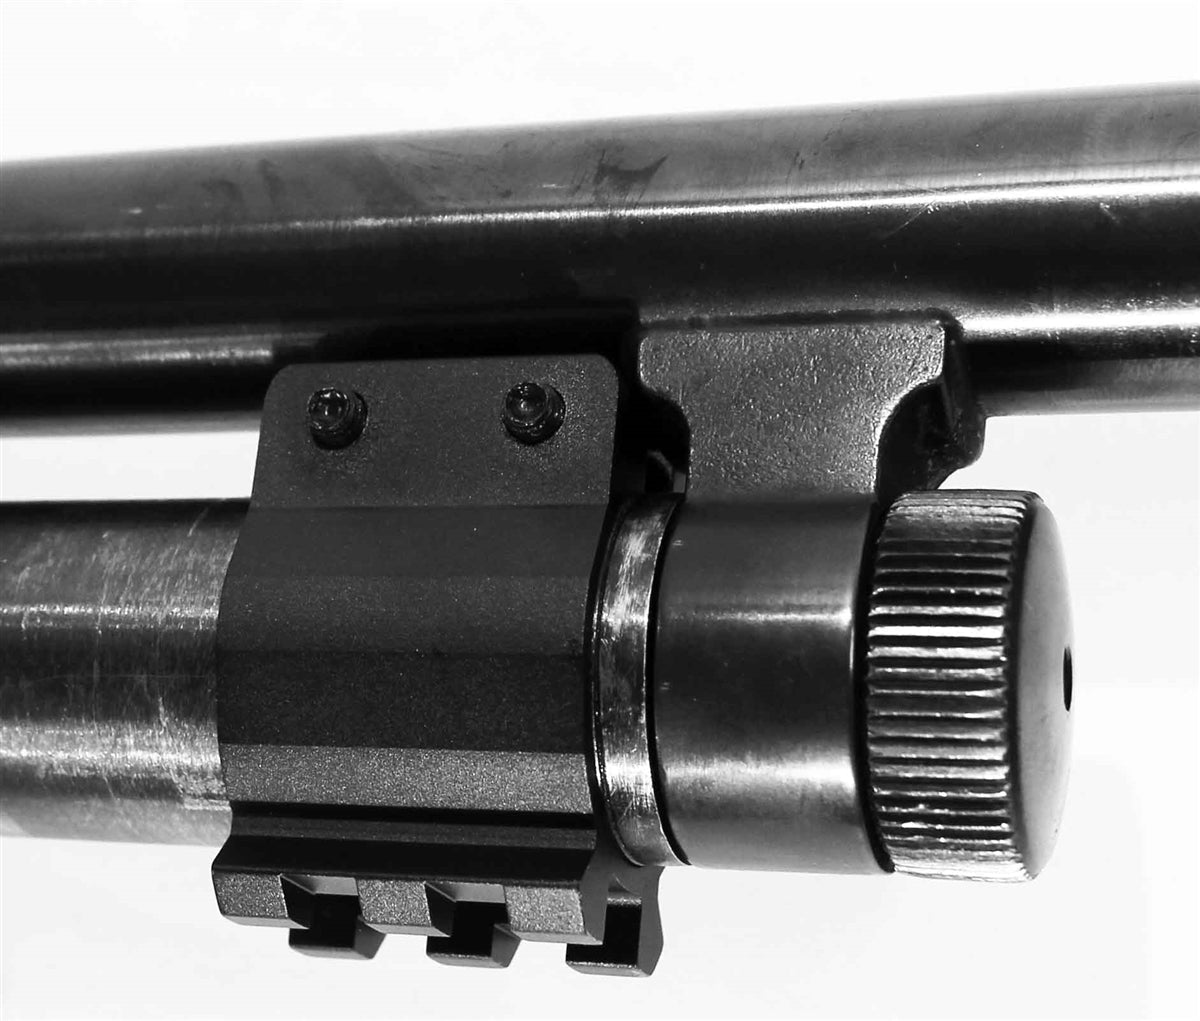 Tactical Single Picatinny Rail Mount Compatible With Remington 870 12 Gauge Pumps. - TRINITY SUPPLY INC